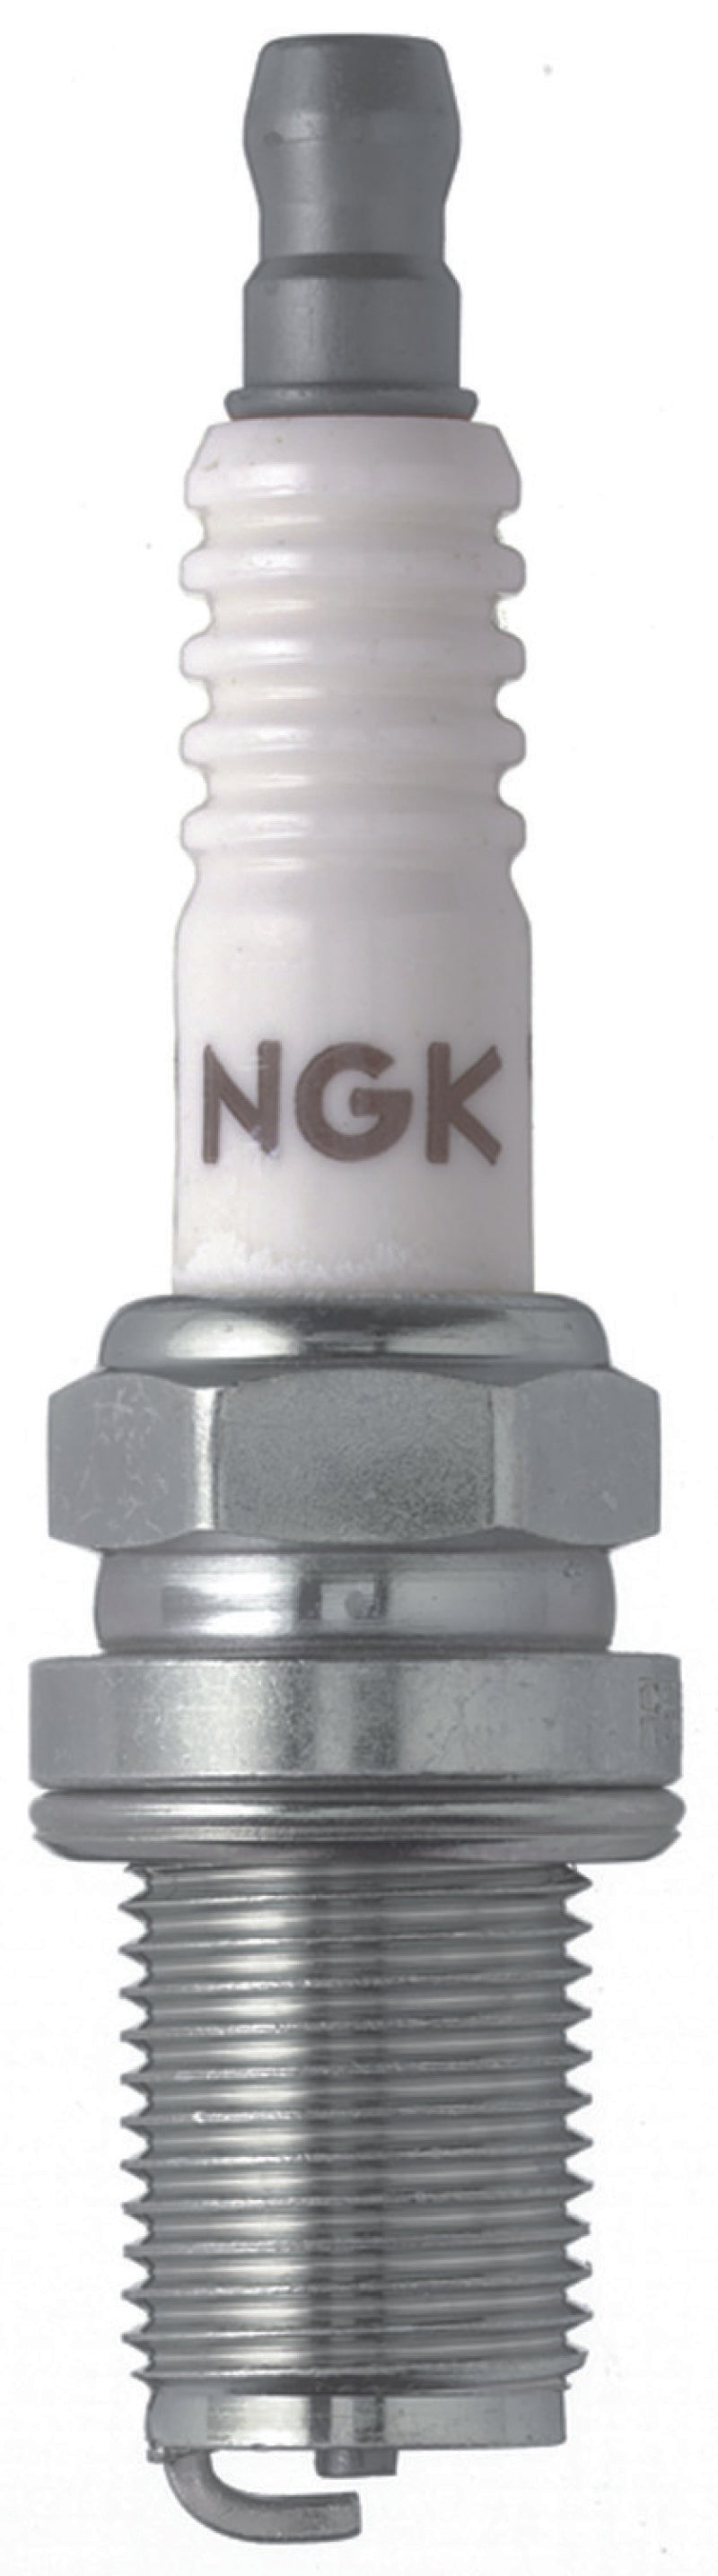 NGK Nickel Spark Plug Box of 4 (R5671A-10) -  Shop now at Performance Car Parts